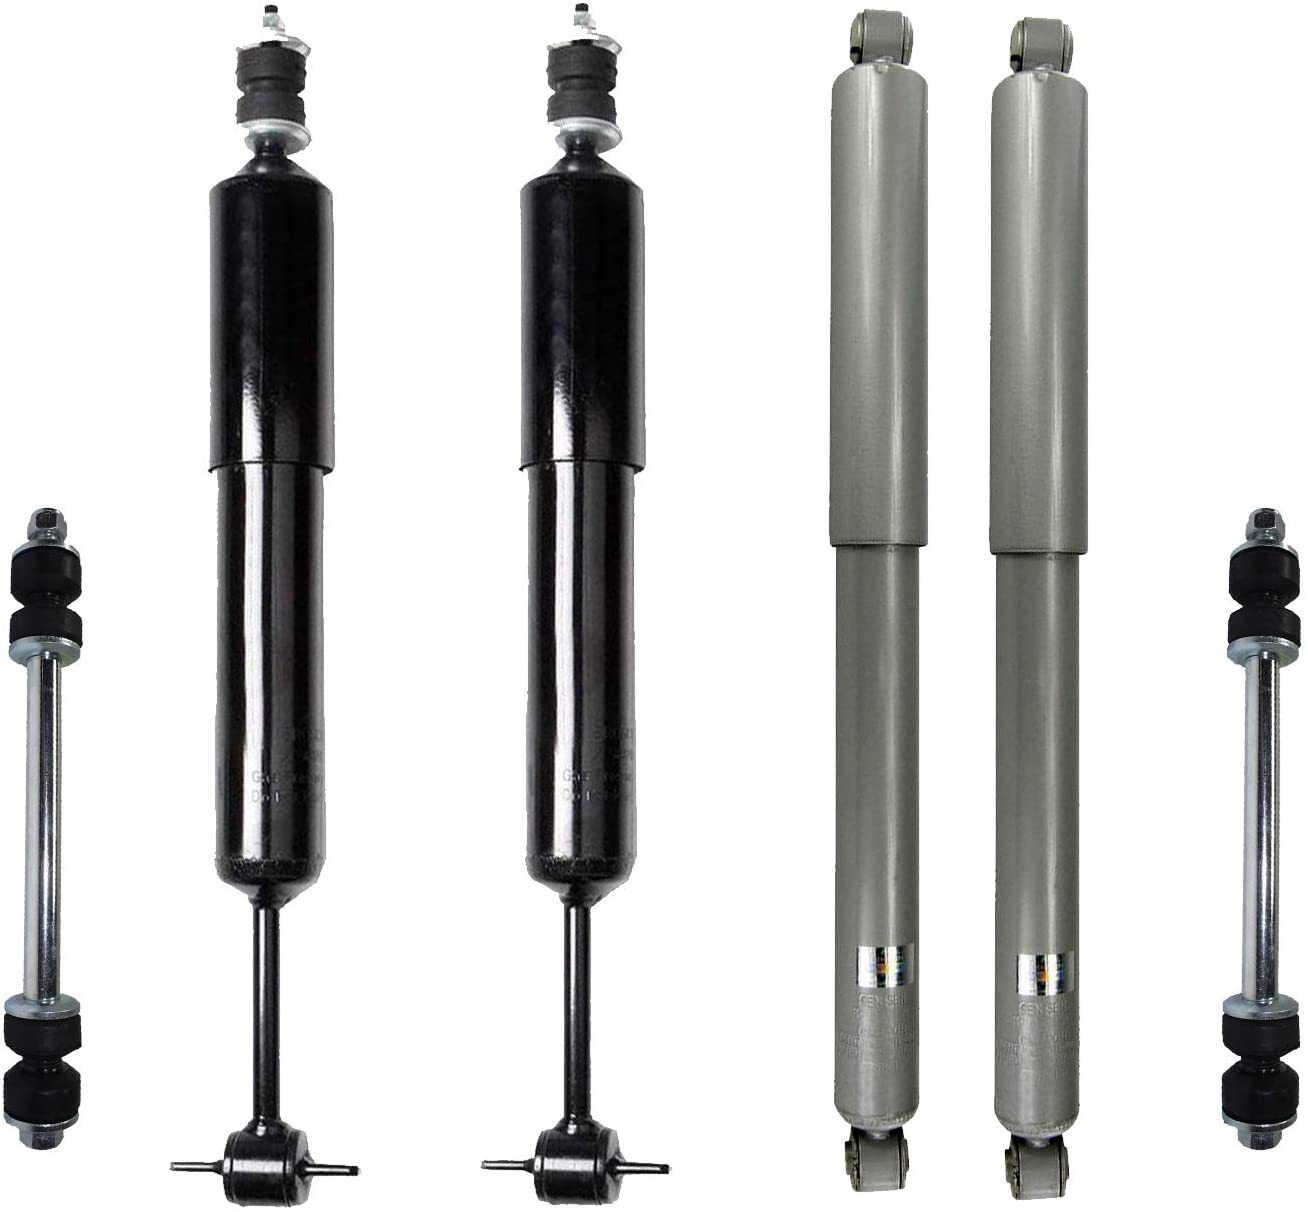 Detroit Axle - 6pc Front and Rear Shock Absorbers with Front Sway Bar Links for Ford Ranger (Exc FX4 or Highrider) Mazda B3000 B4000-4WD with Front Torsion Bar Sus.